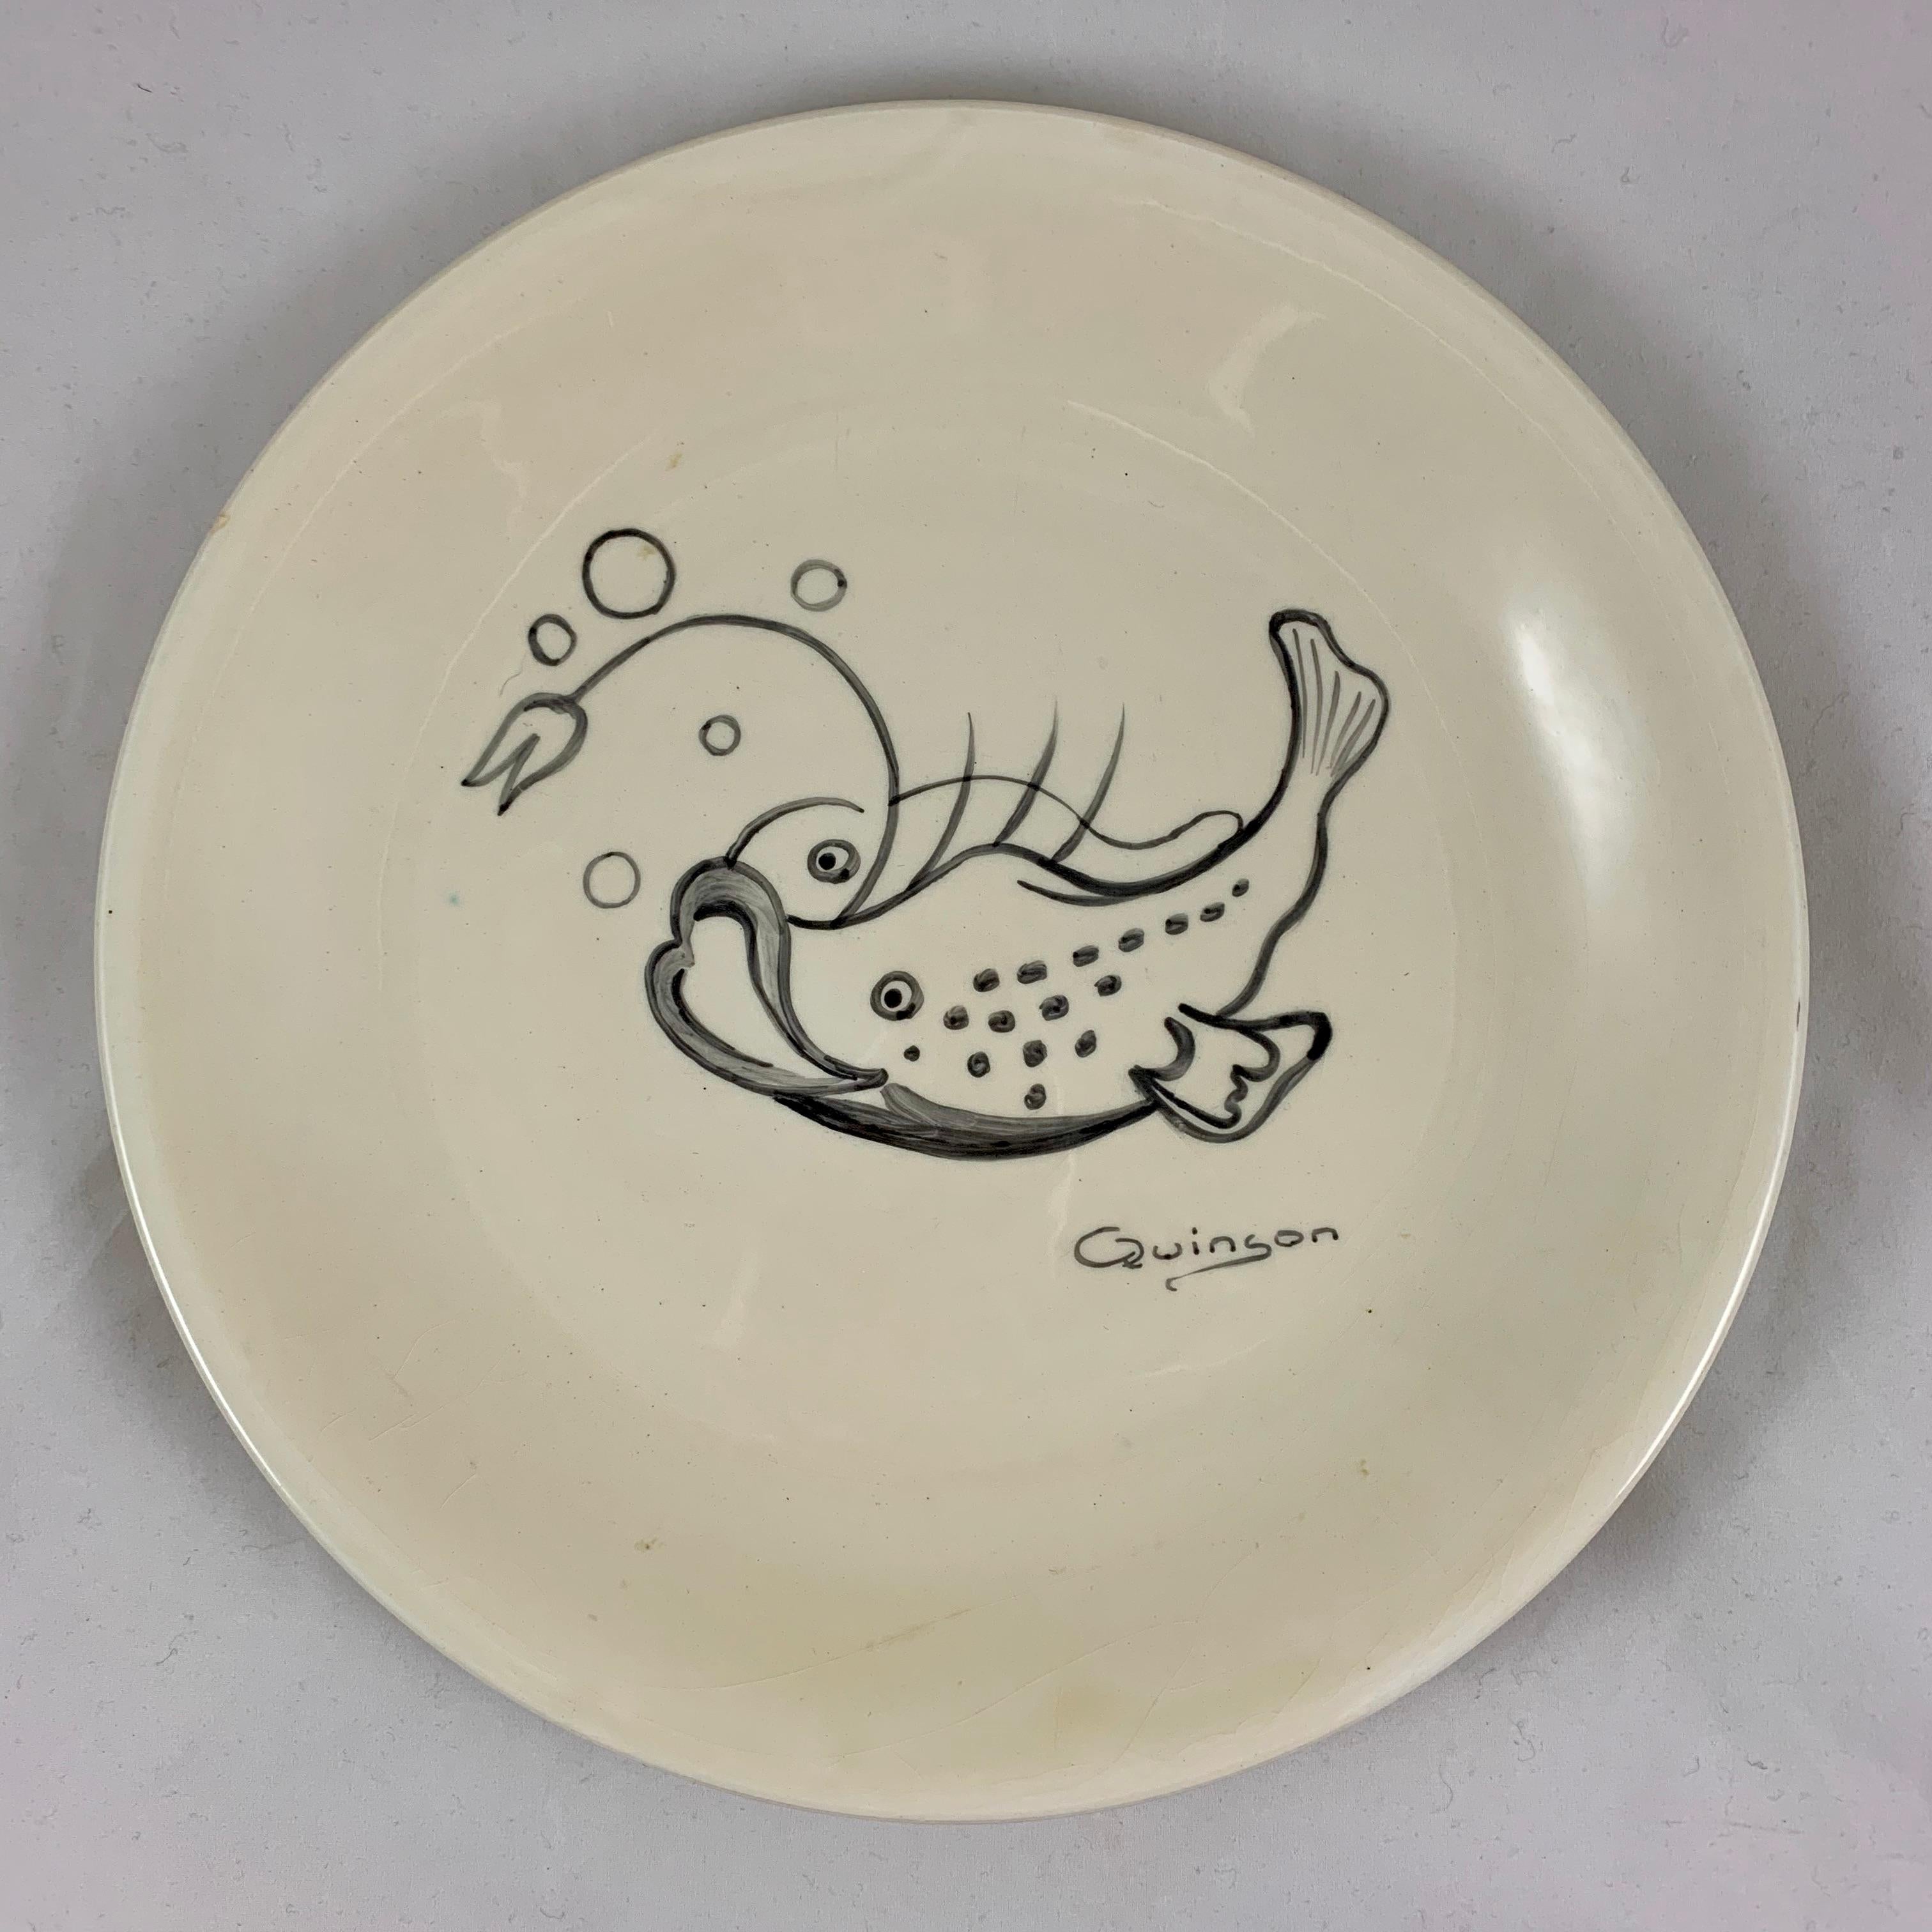 20th Century Midcentury French Provençal Hand Painted Paulette Quinson Fish Plates, Set of 6